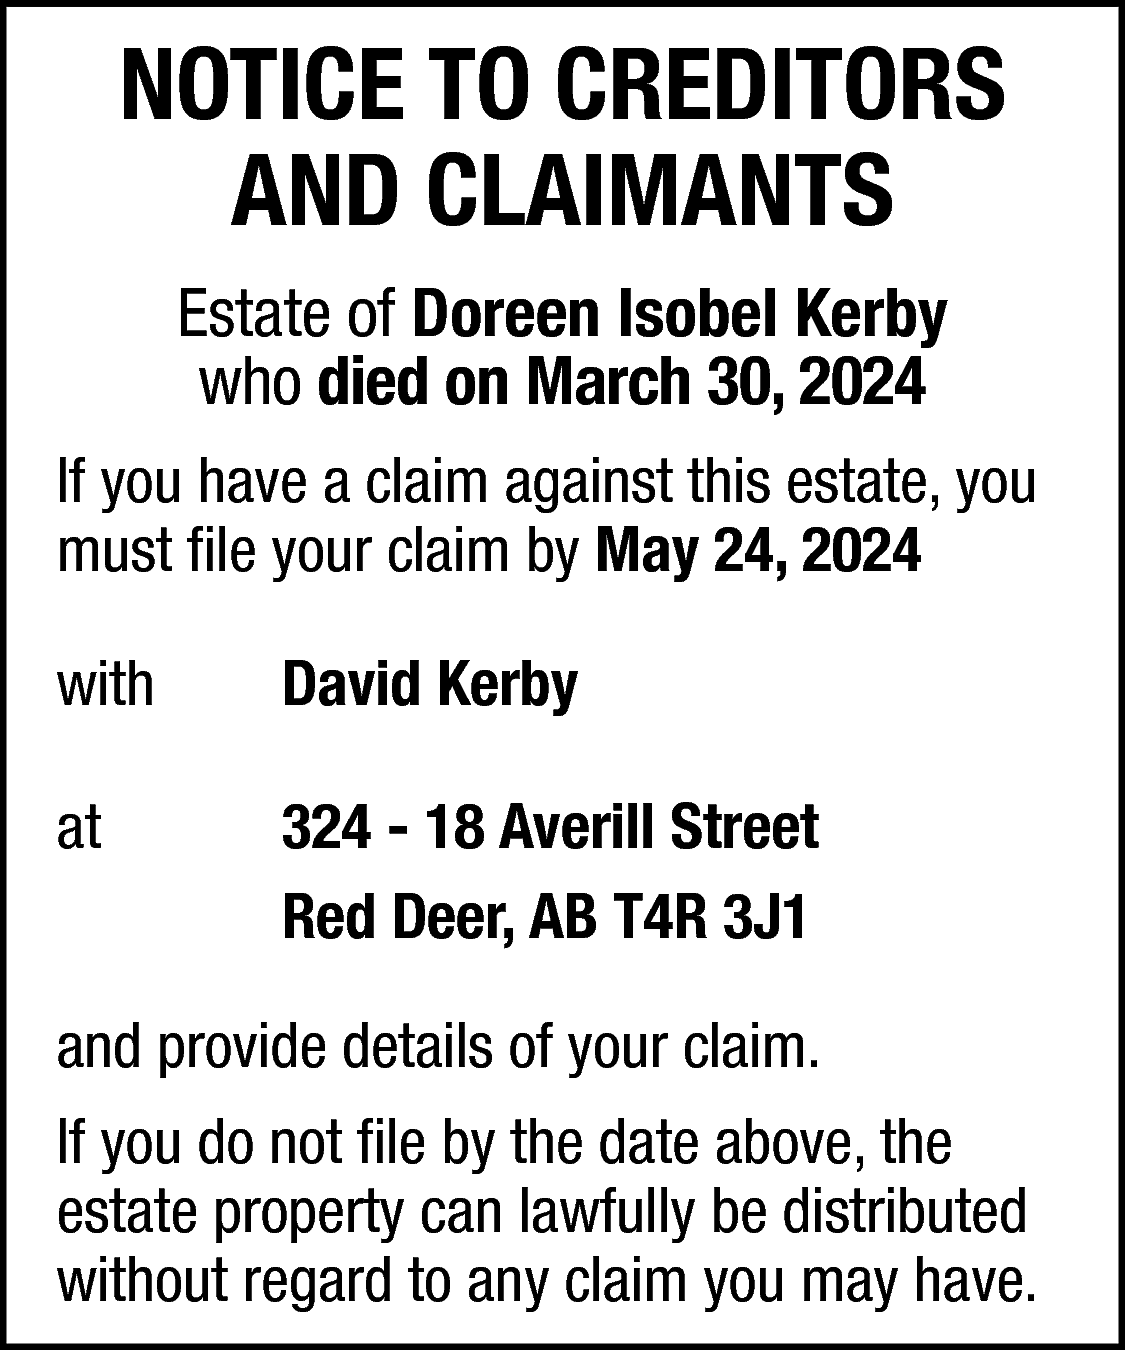 NOTICE TO CREDITORS <br>AND CLAIMANTS  NOTICE TO CREDITORS  AND CLAIMANTS  Estate of Doreen Isobel Kerby  who died on March 30, 2024  If you have a claim against this estate, you  must file your claim by May 24, 2024  with    David Kerby    at    324 - 18 Averill Street  Red Deer, AB T4R 3J1    and provide details of your claim.  If you do not file by the date above, the  estate property can lawfully be distributed  without regard to any claim you may have.    